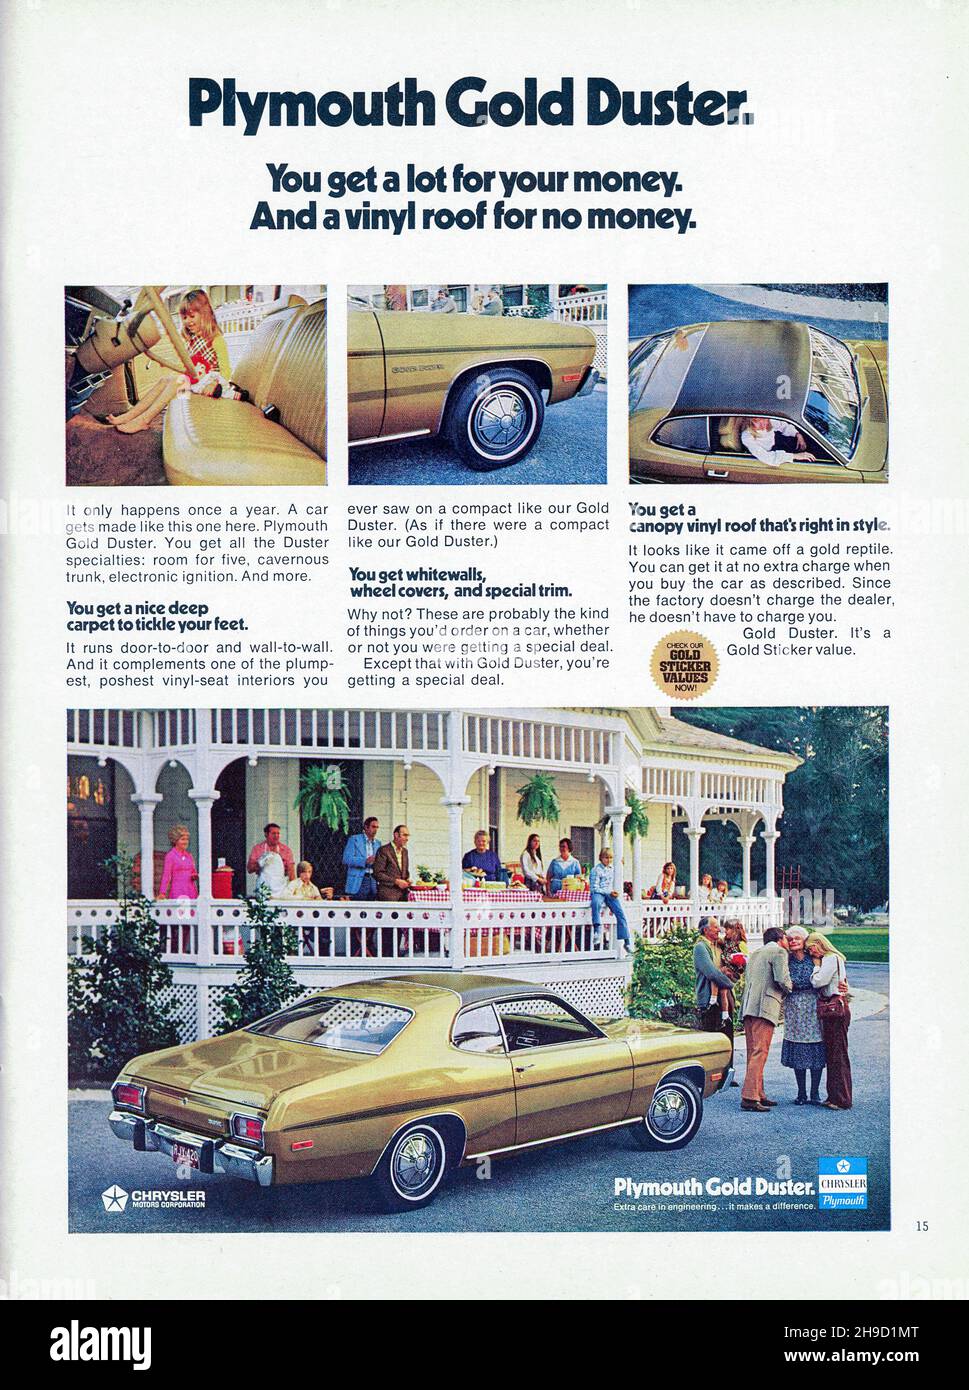 May 1973 'Playboy' issue advertising, USA Stock Photo